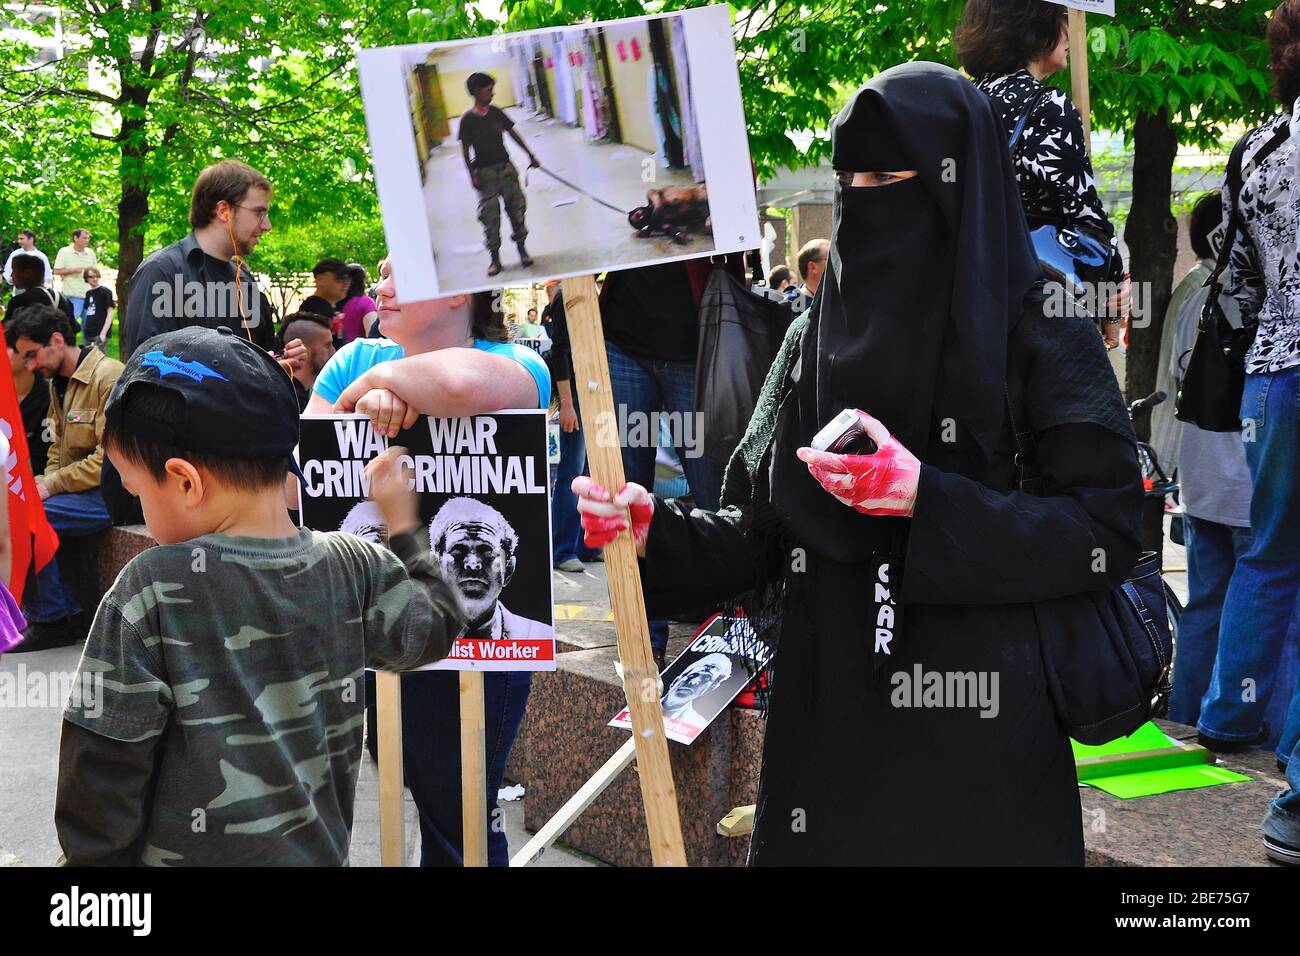 Toronto, Ontario, Canada - 05/29/2009:  Women protestors dressed in hijab holding placards on the peace demonstration in Toronto, Ontario, Canada Stock Photo